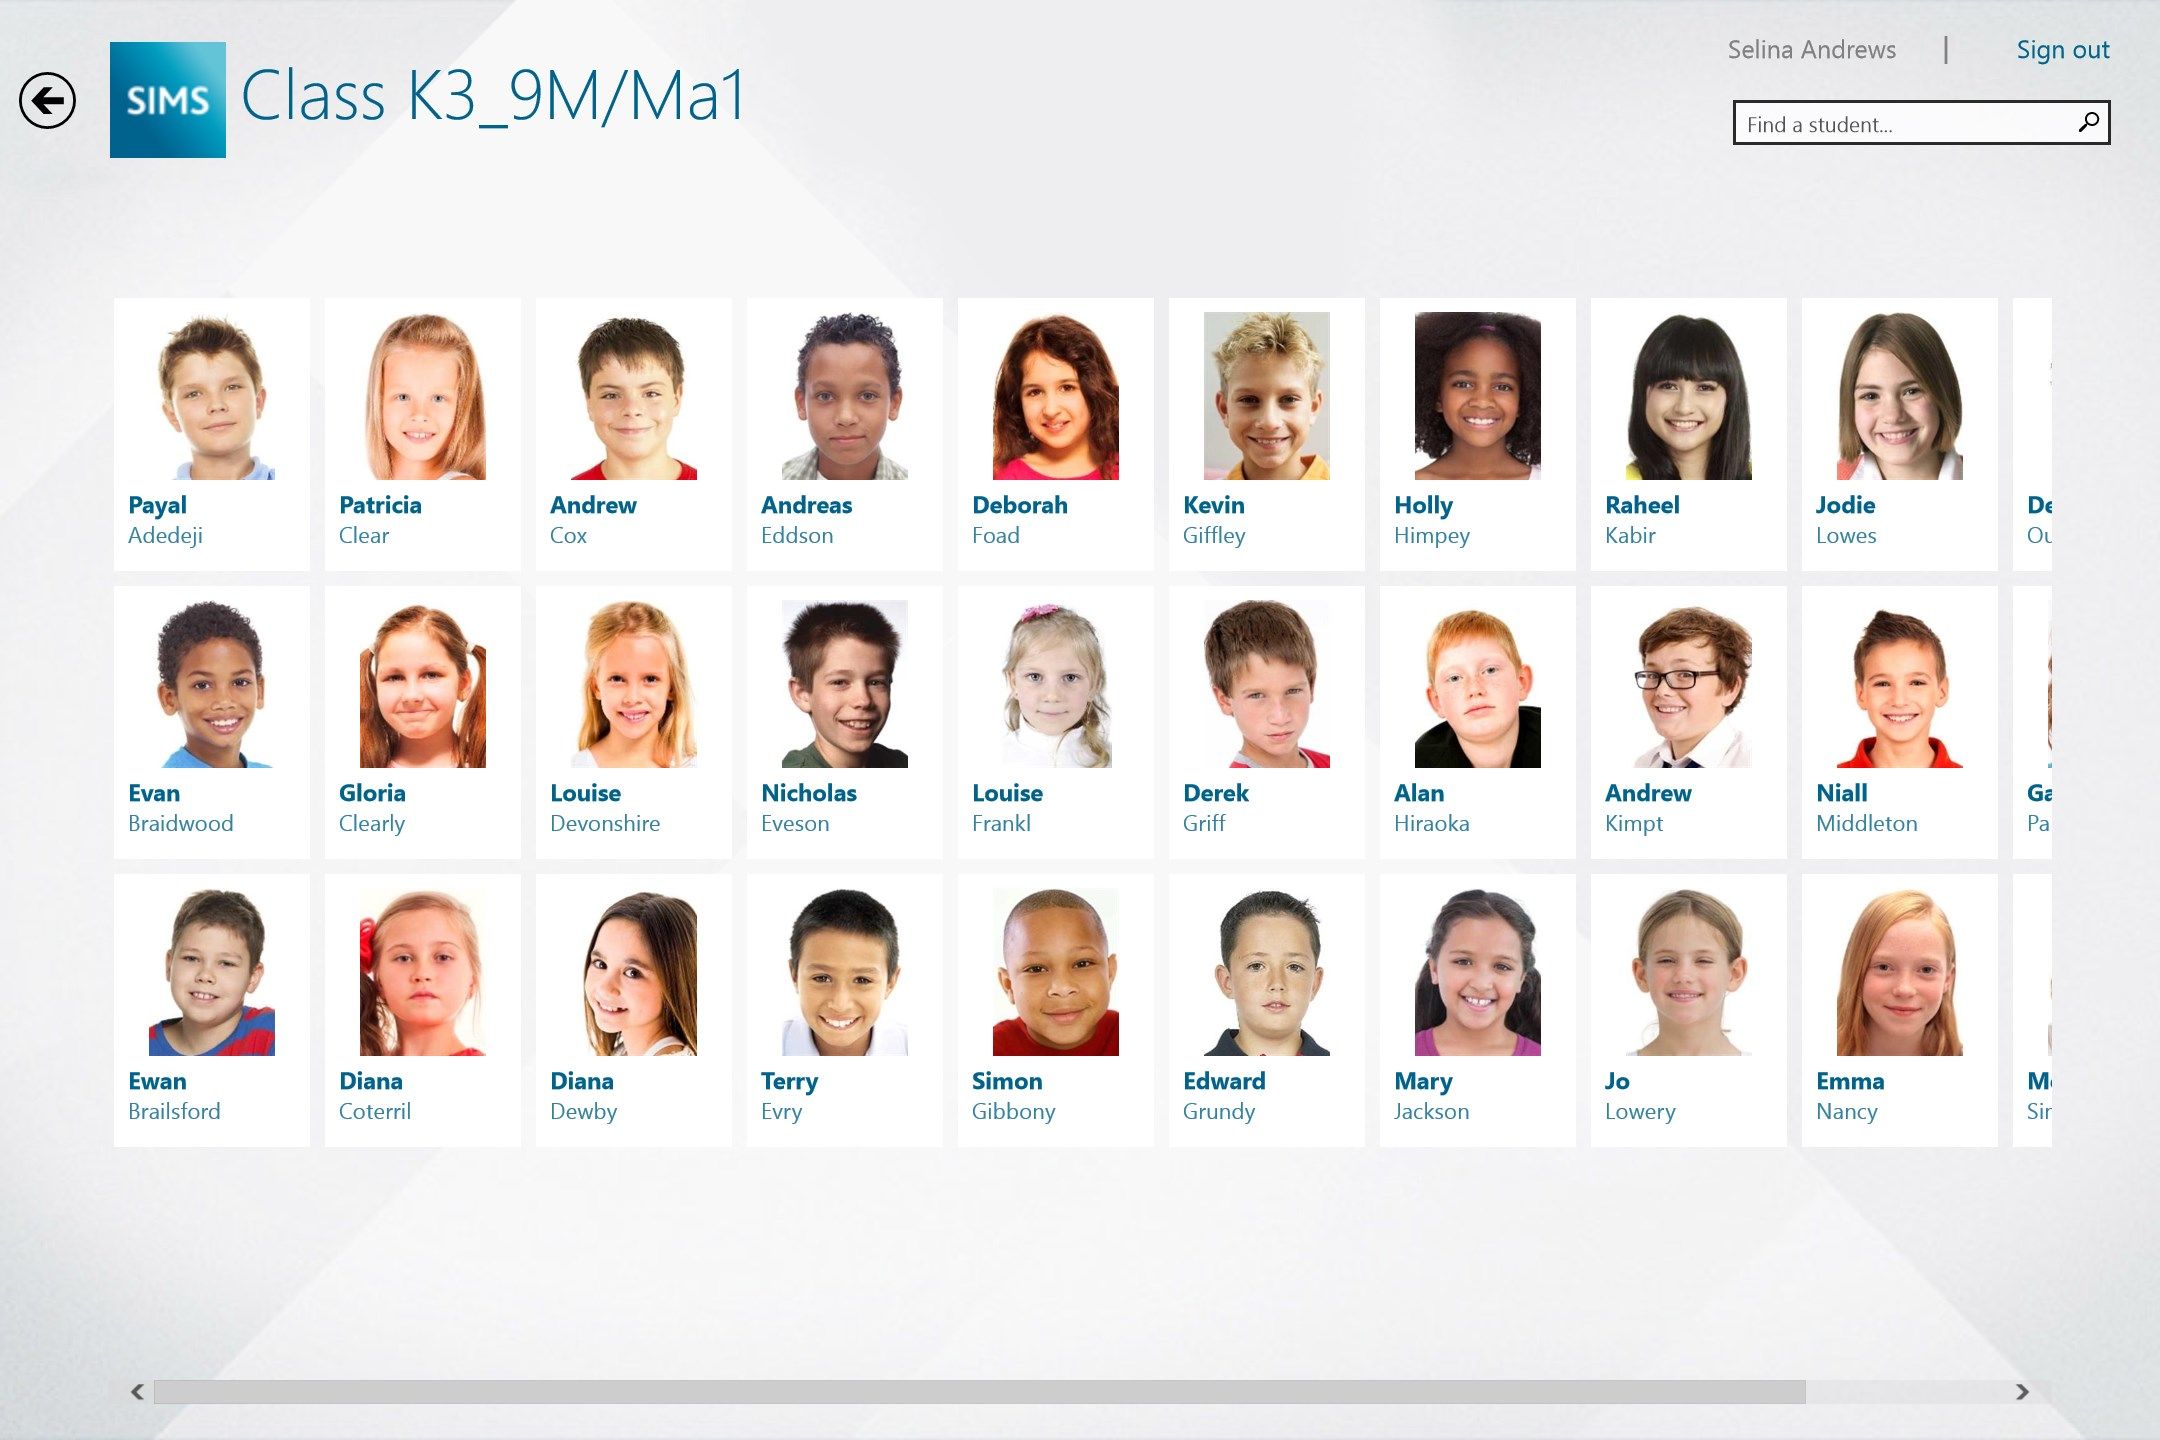 View your class – showing pupil images with preferred name direct from your SIMS system in real-time